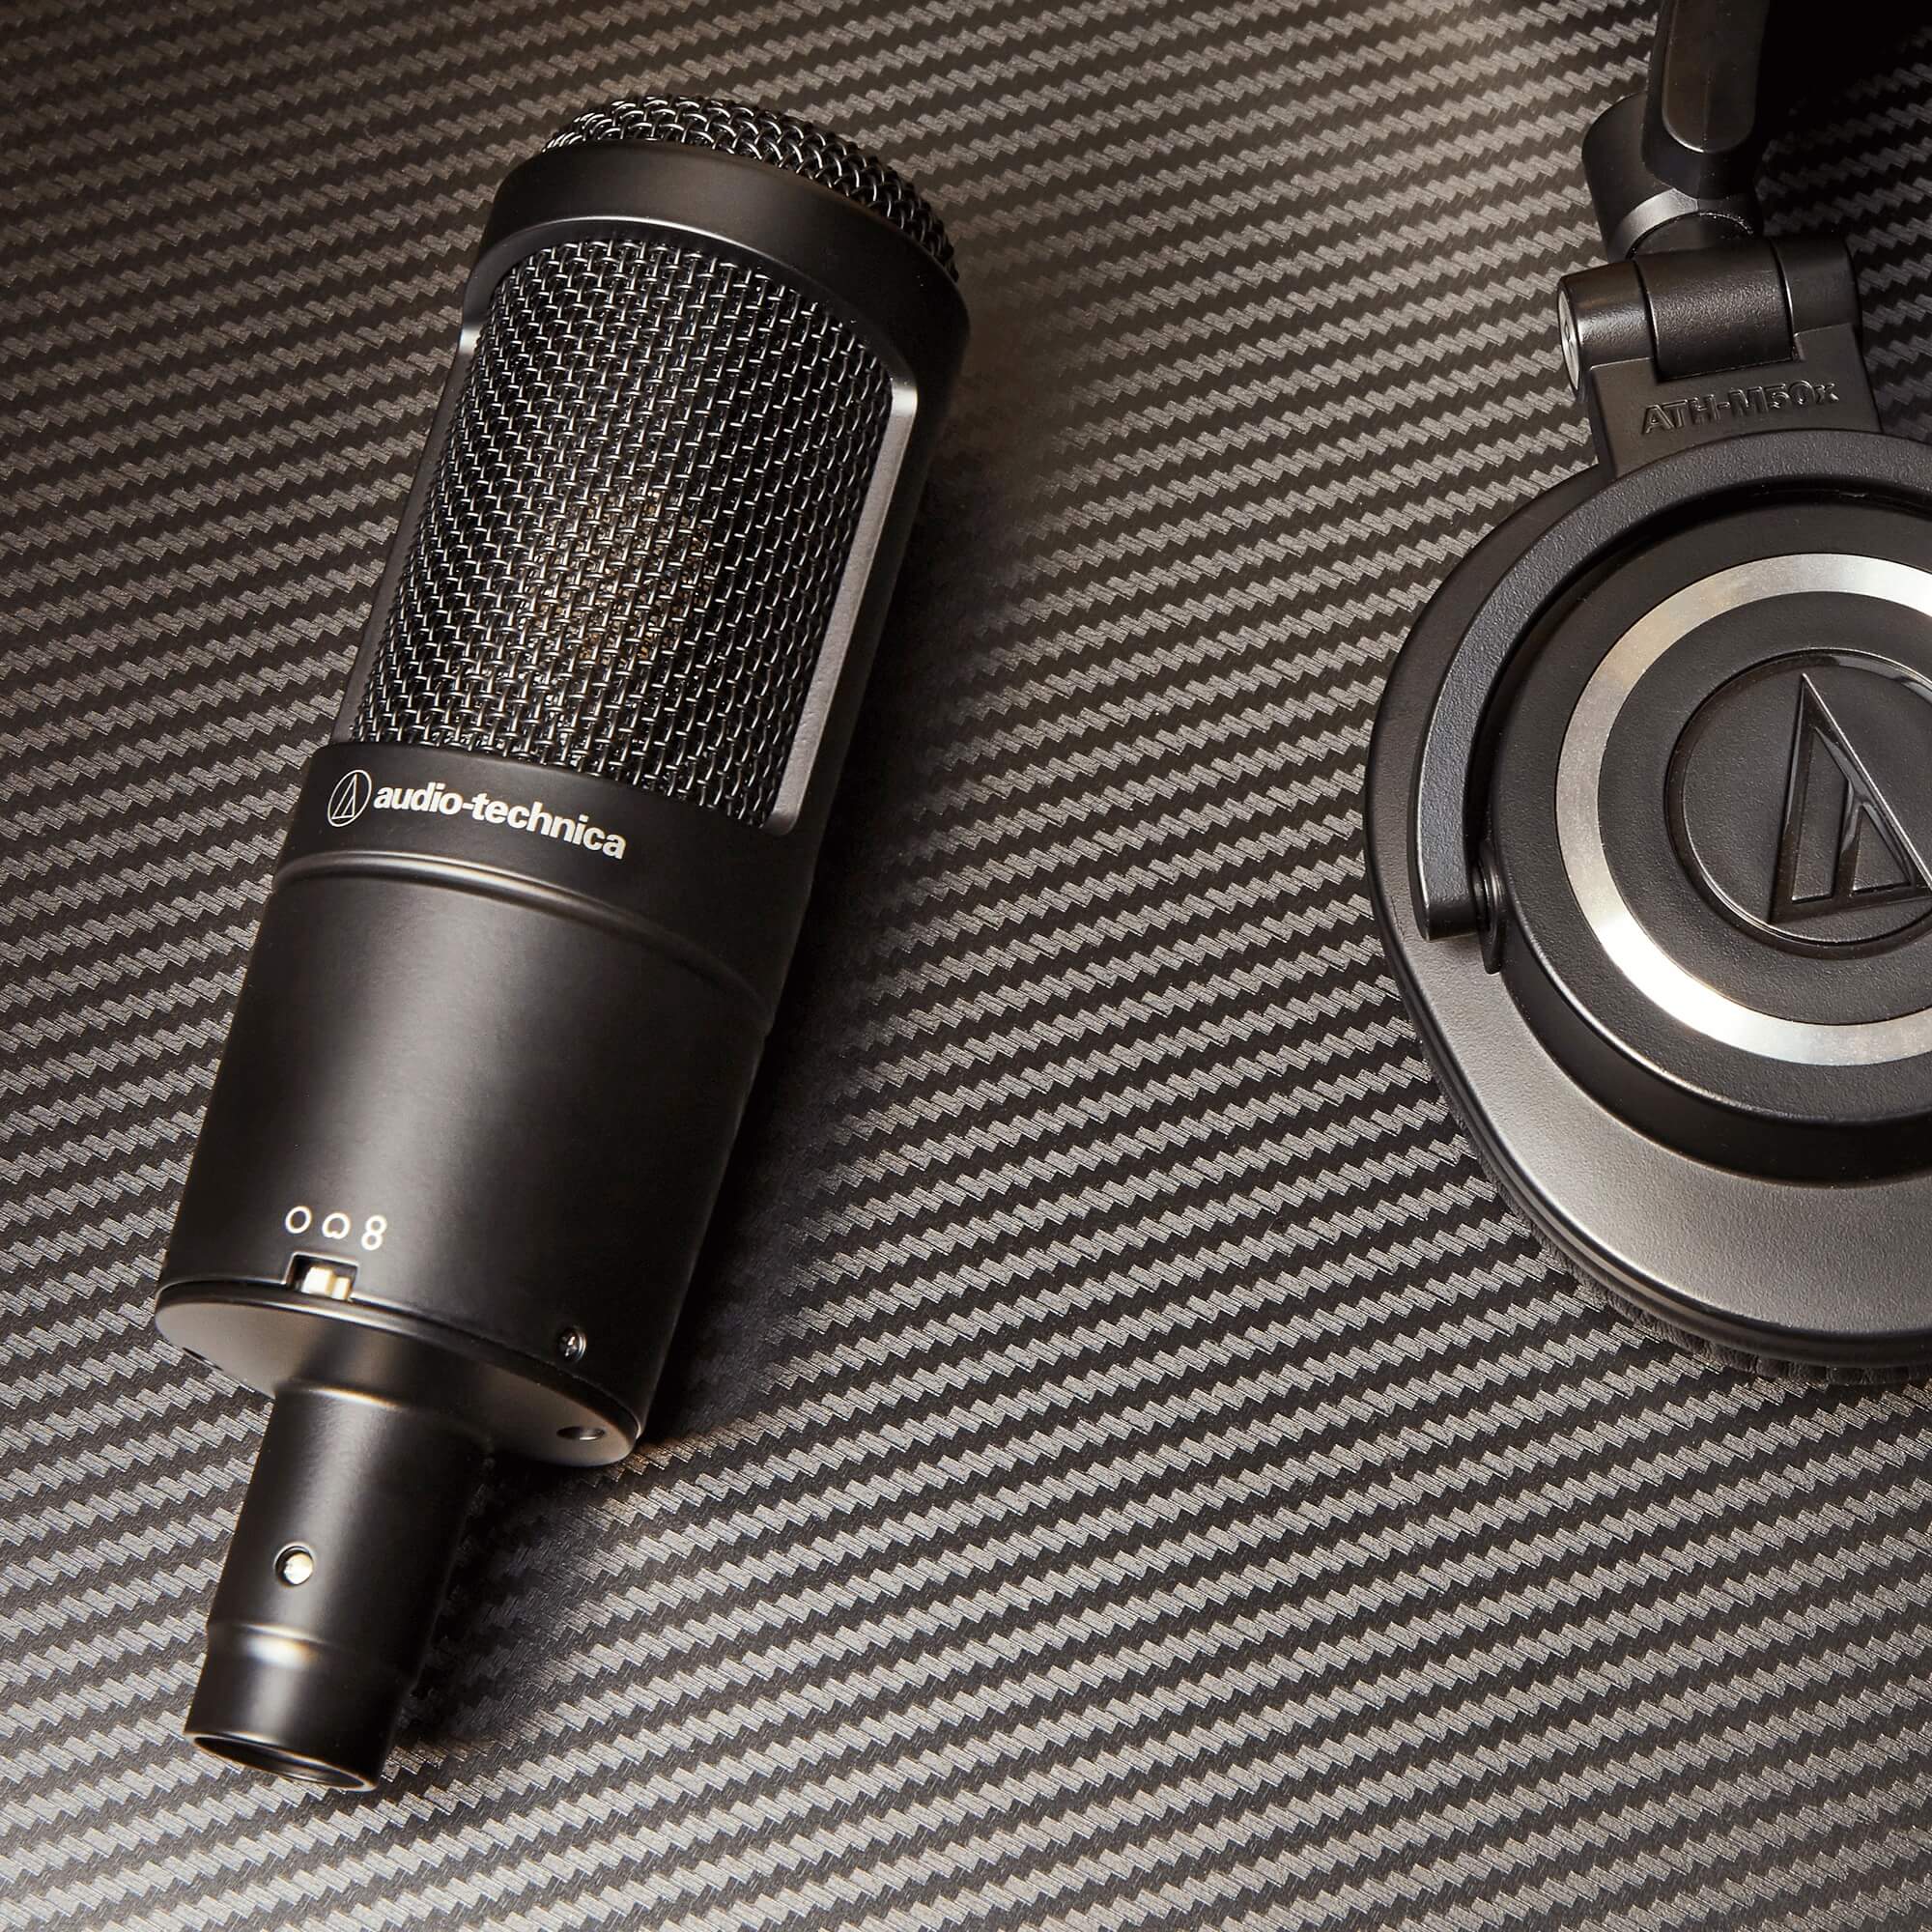 Audio-Technica AT2050 - Multi-pattern Condenser Microphone, shown with AT headphones